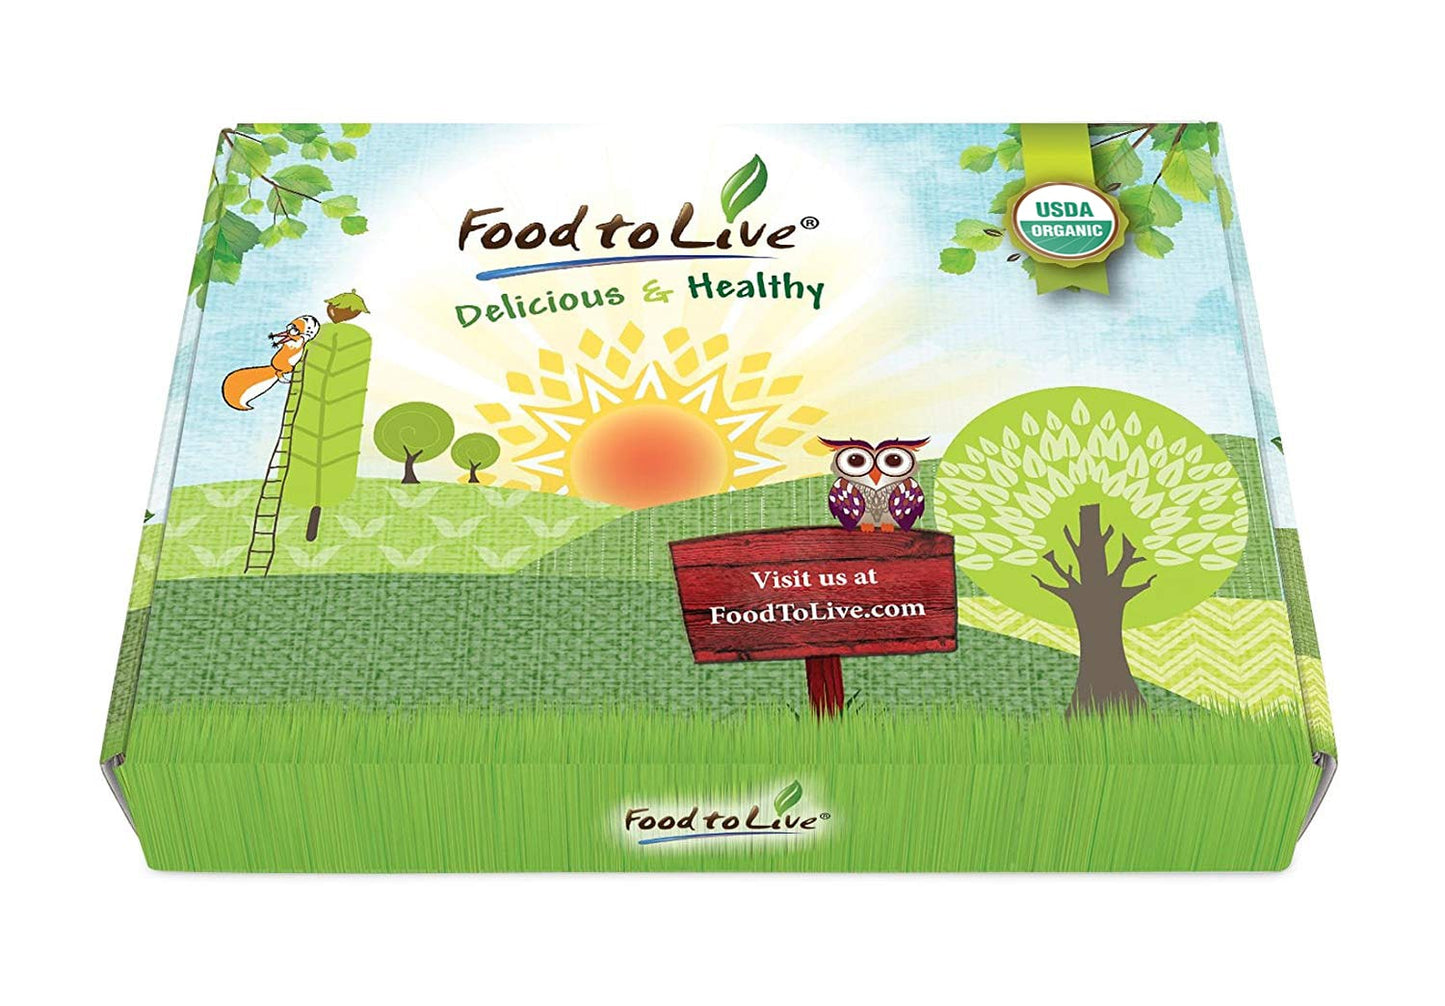 Organic Superfoods in a Gift Box - A Variety Pack of Pumpkin Seeds, Hemp Seeds, Chia Seeds, Golden Flax Seeds, Cacao Nibs - by Food to Live